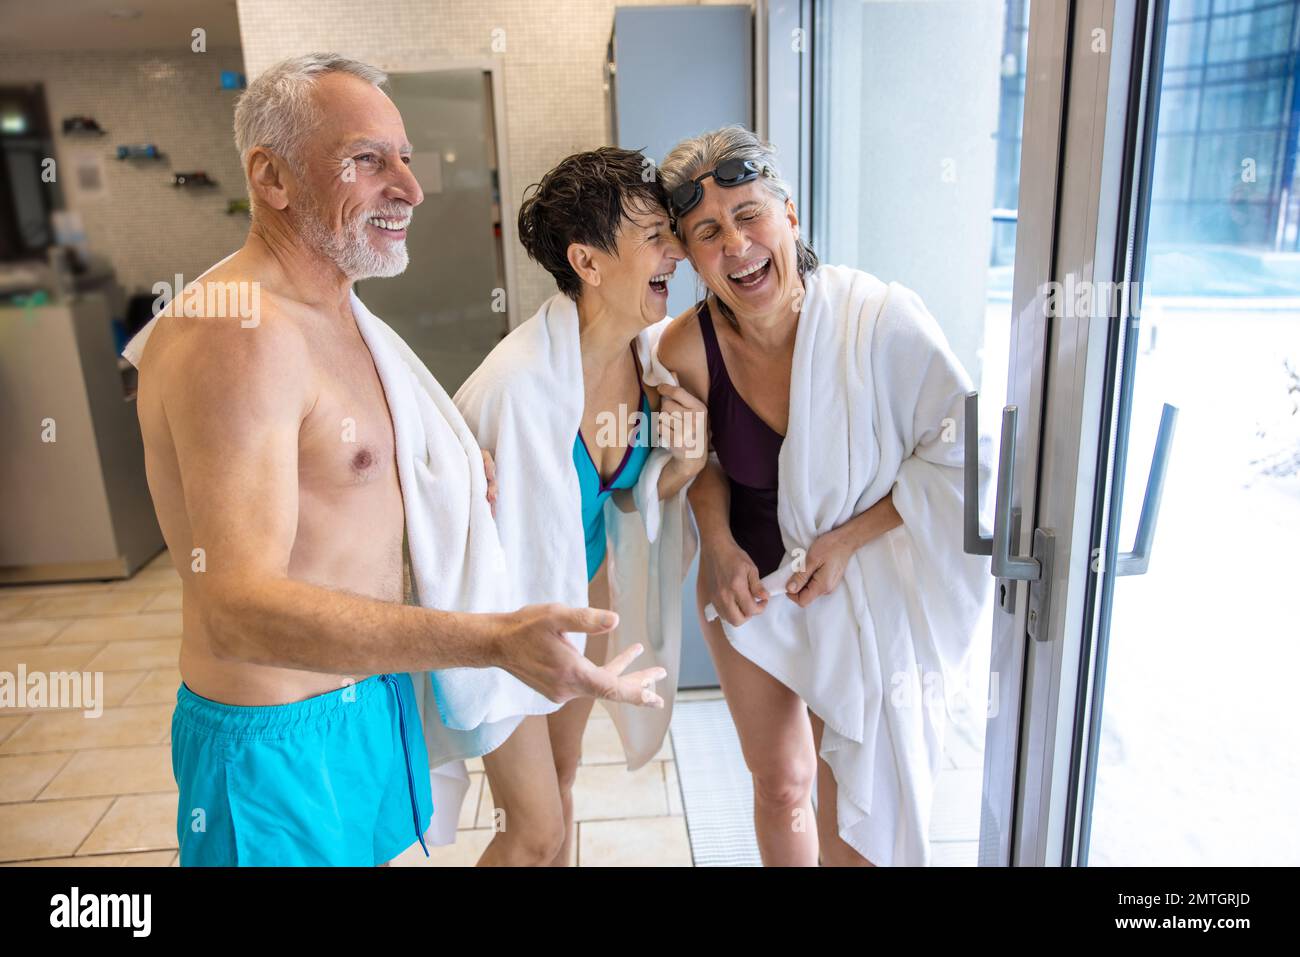 Senior in swimwear talking after swimming and looking enjoyed and energized Stock Photo